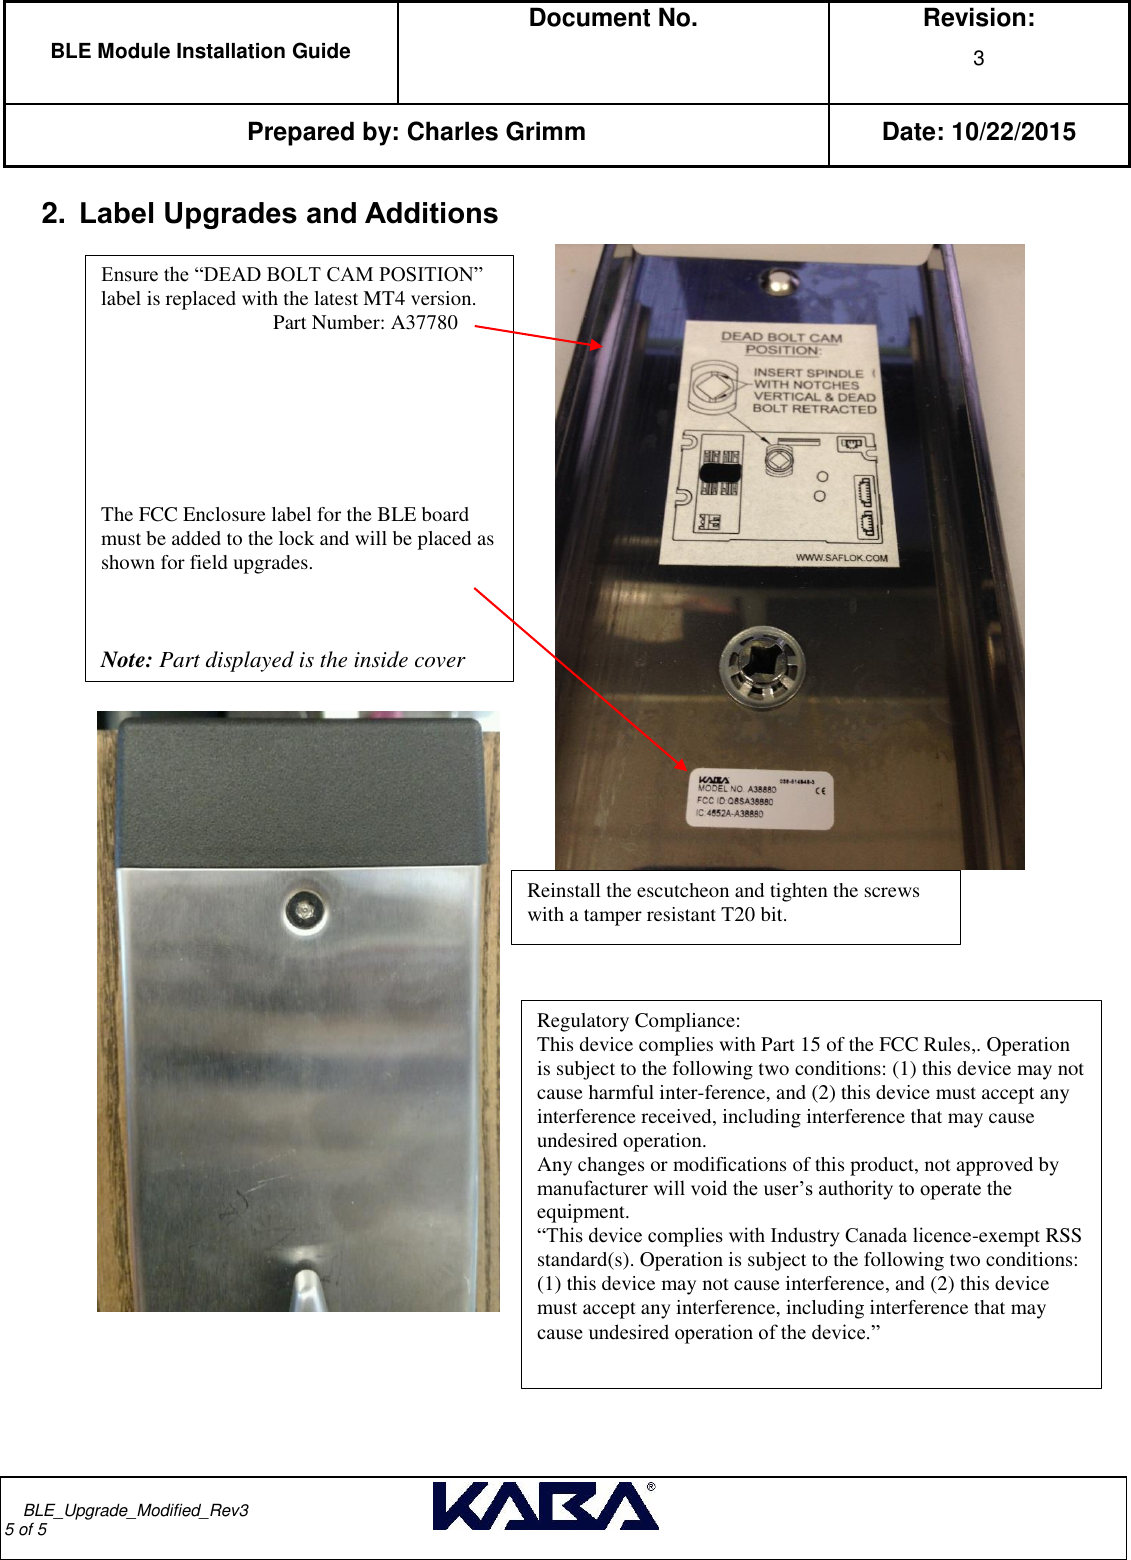  BLE Module Installation Guide  Document No.  Revision: 3   Prepared by: Charles Grimm Date: 10/22/2015         BLE_Upgrade_Modified_Rev3                                                                                                                                                                                       5 of 5  2. Label Upgrades and Additions                                                  Reinstall the escutcheon and tighten the screws with a tamper resistant T20 bit. Ensure the “DEAD BOLT CAM POSITION” label is replaced with the latest MT4 version.                                    Part Number: A37780            The FCC Enclosure label for the BLE board must be added to the lock and will be placed as shown for field upgrades.                                       Note: Part displayed is the inside cover   Regulatory Compliance: This device complies with Part 15 of the FCC Rules,. Operation is subject to the following two conditions: (1) this device may not cause harmful inter-ference, and (2) this device must accept any interference received, including interference that may cause undesired operation. Any changes or modifications of this product, not approved by manufacturer will void the user’s authority to operate the equipment. “This device complies with Industry Canada licence-exempt RSS standard(s). Operation is subject to the following two conditions: (1) this device may not cause interference, and (2) this device must accept any interference, including interference that may cause undesired operation of the device.” 